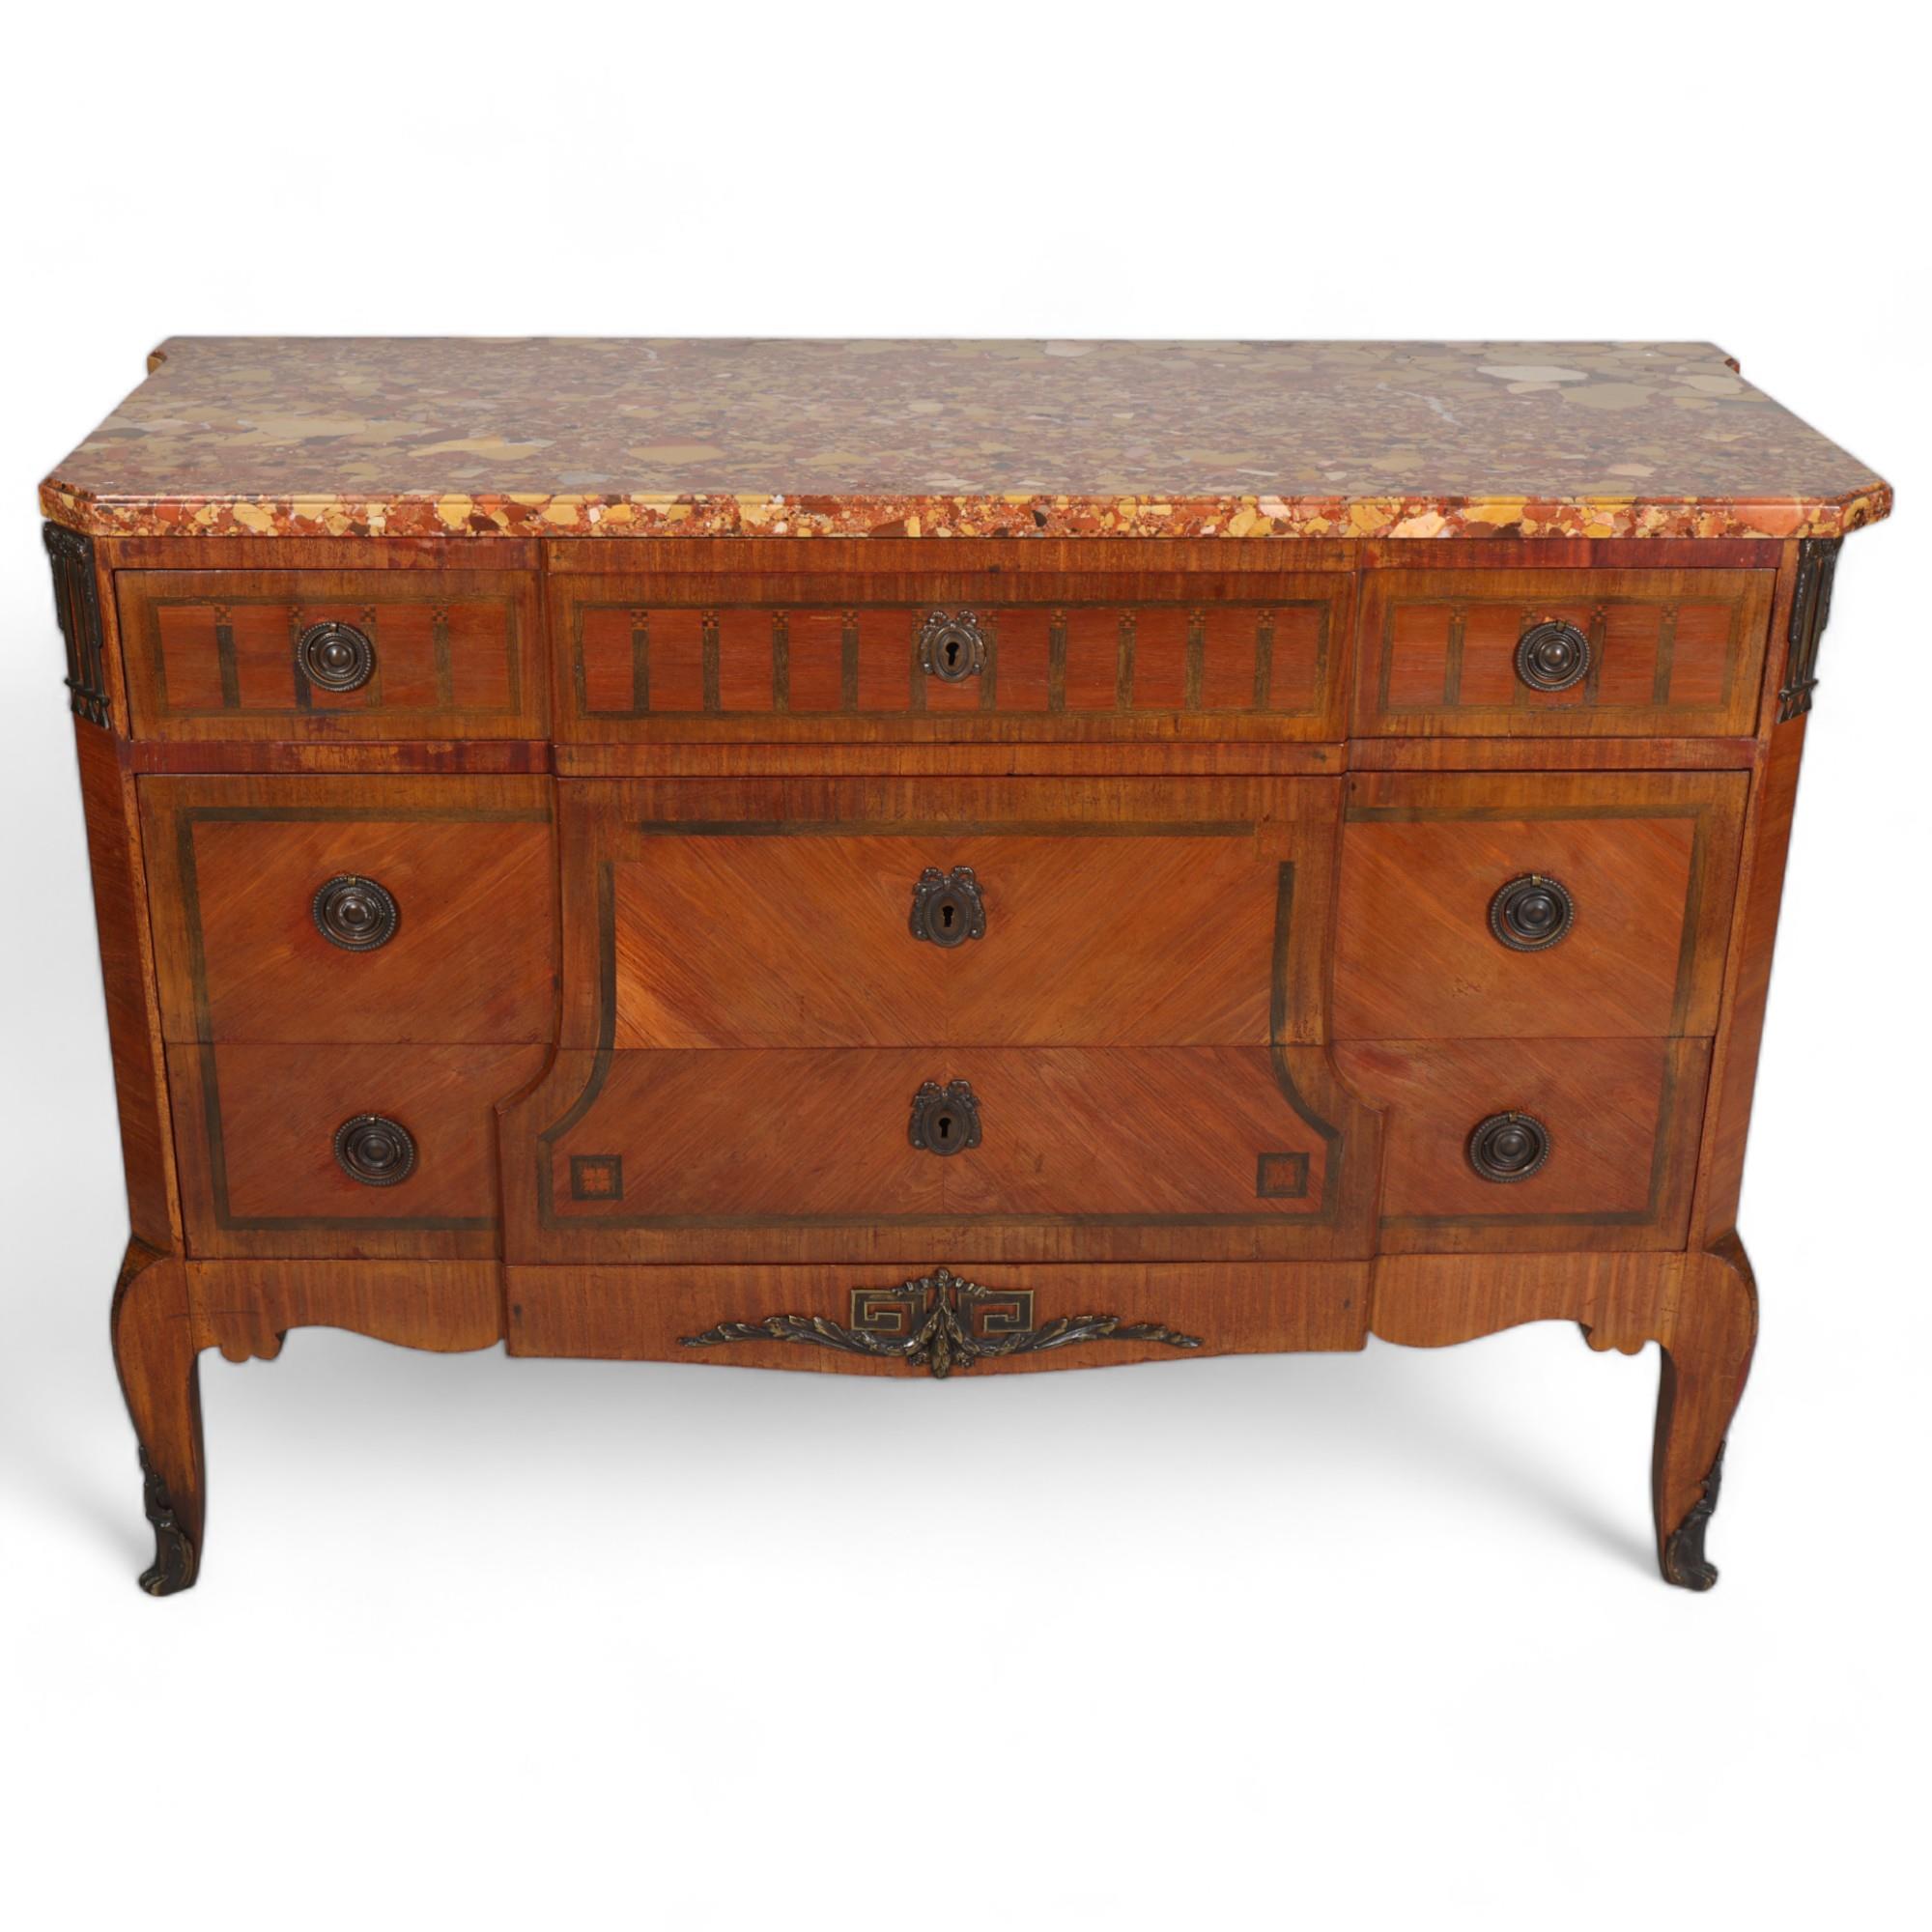 A French marble-topped 3-drawer commode, with inlaid drawer fronts, width 121cm Good condition